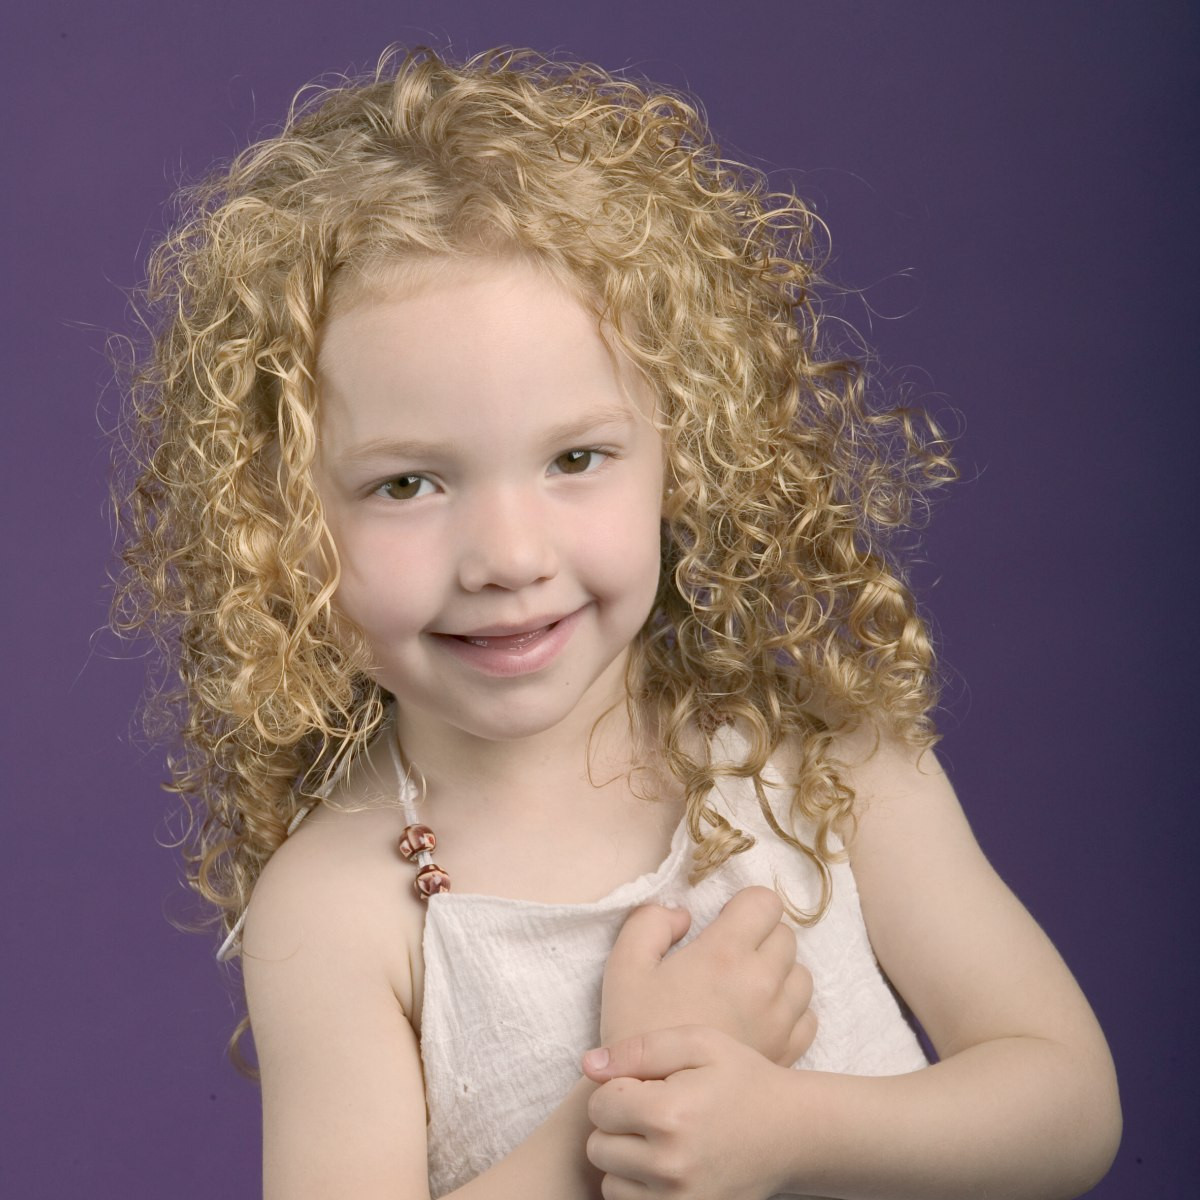 Little Girl Haircuts For Curly Hair
 Spiraling curls for a little girl